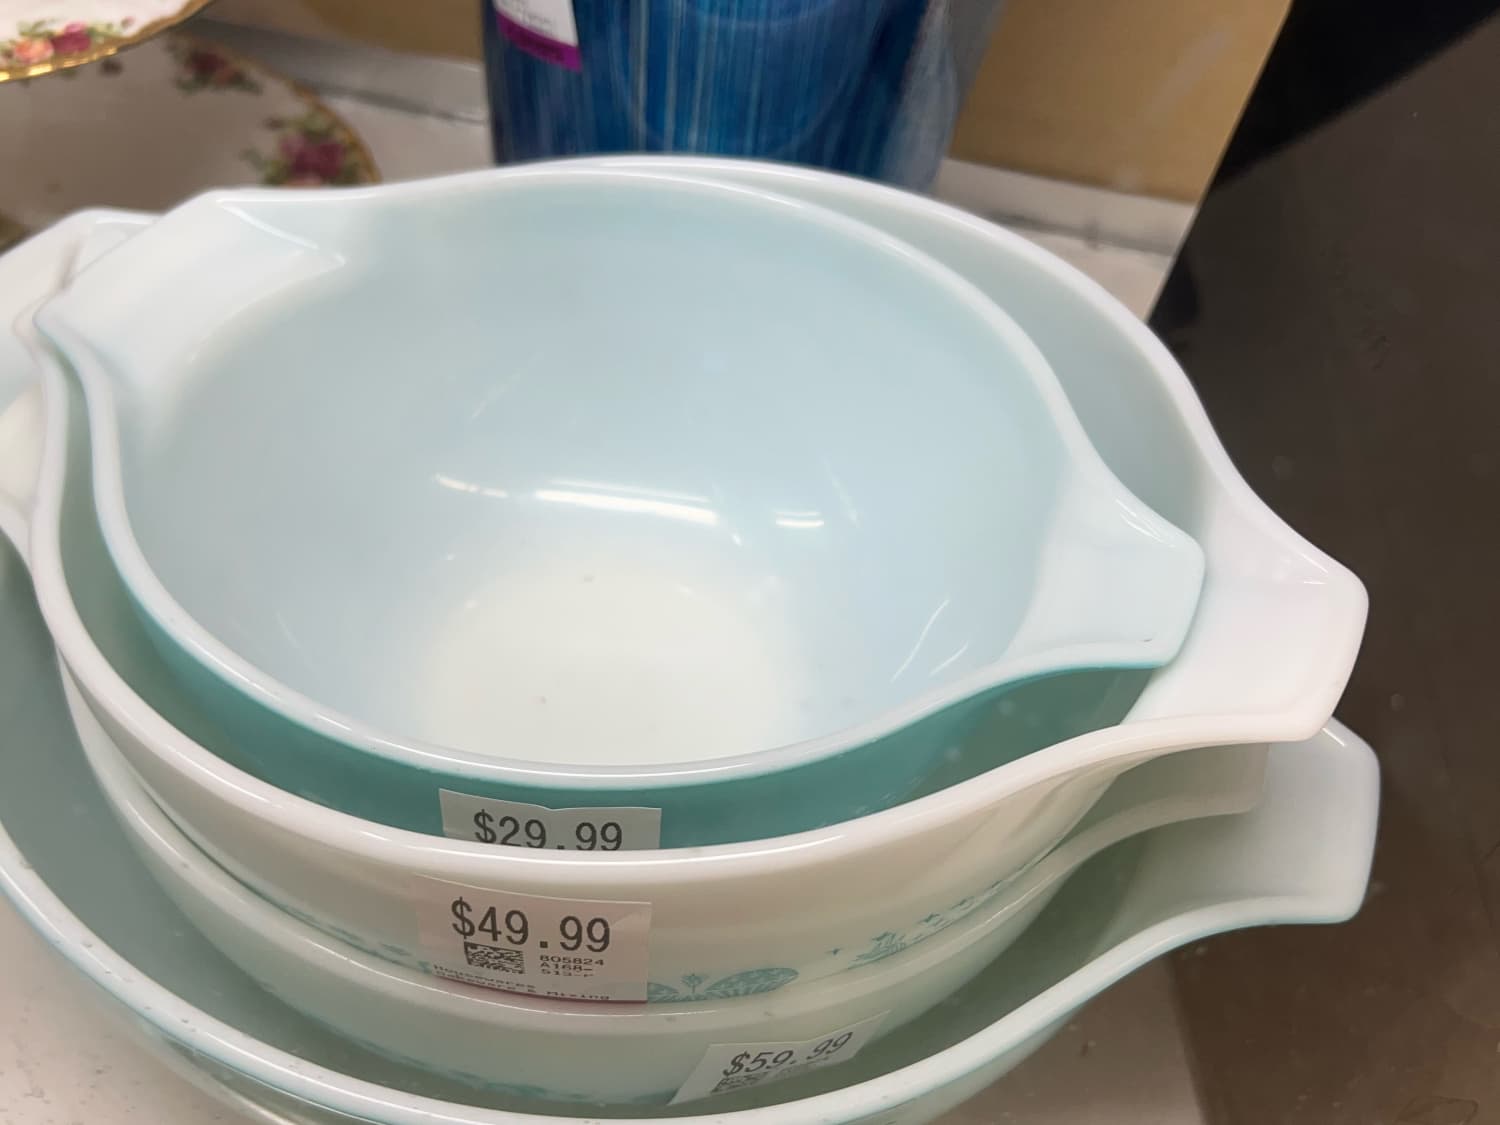 https://cdn.apartmenttherapy.info/image/upload/f_jpg,q_auto:eco,c_fill,g_auto,w_1500,ar_4:3/k%2FEdit%2F2023-02-best-vintage-pyrex-to-gift%2Fpyrex_2